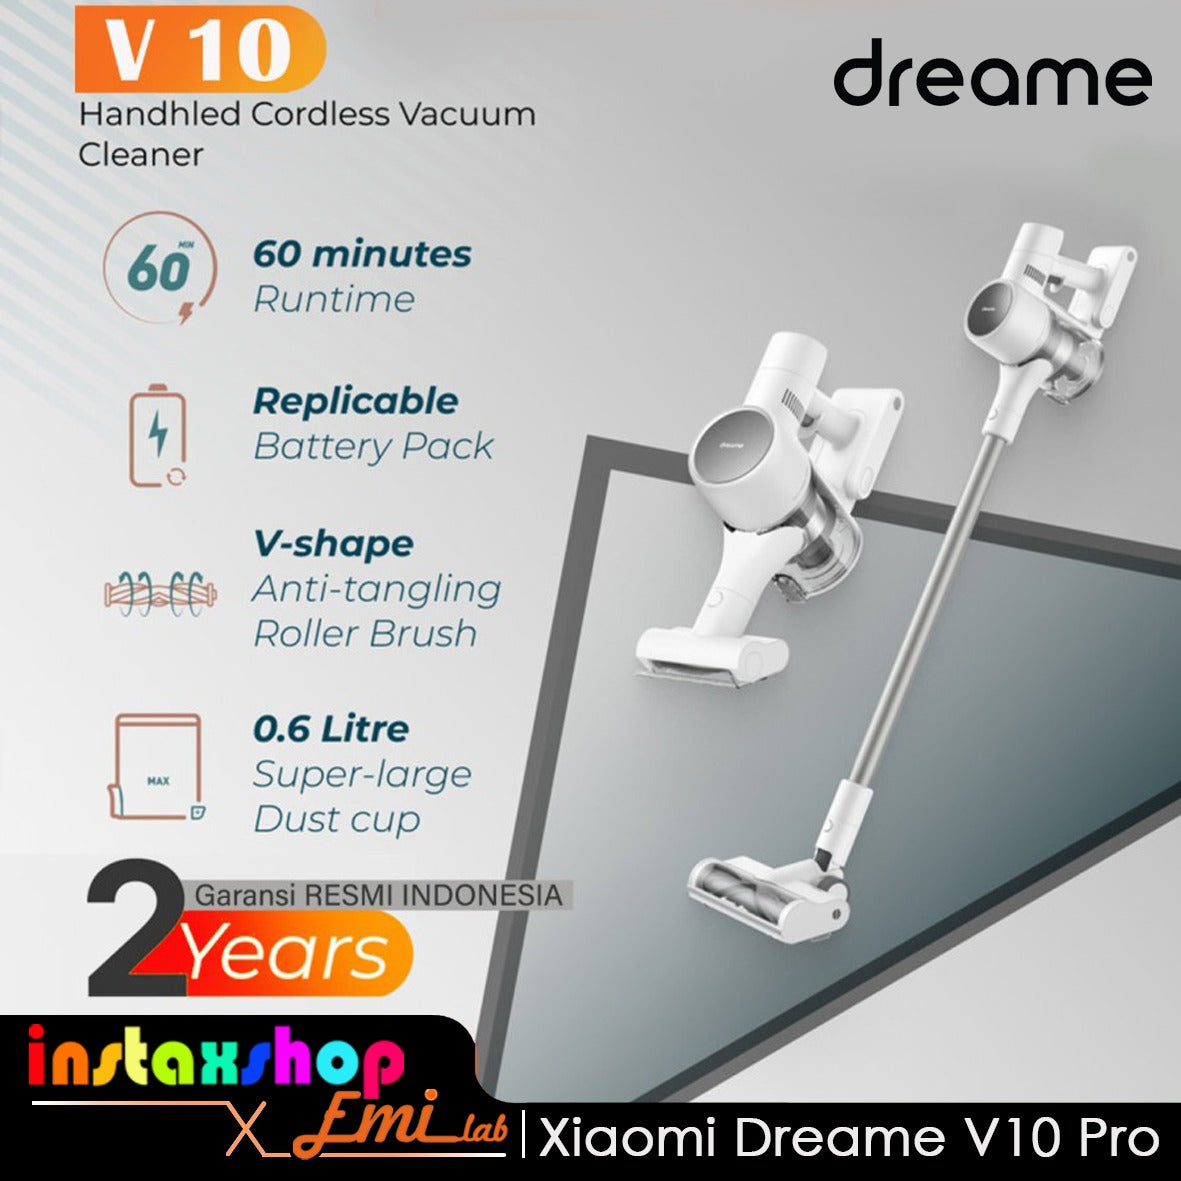 dream h12 pro - Buy dream h12 pro with free shipping on AliExpress